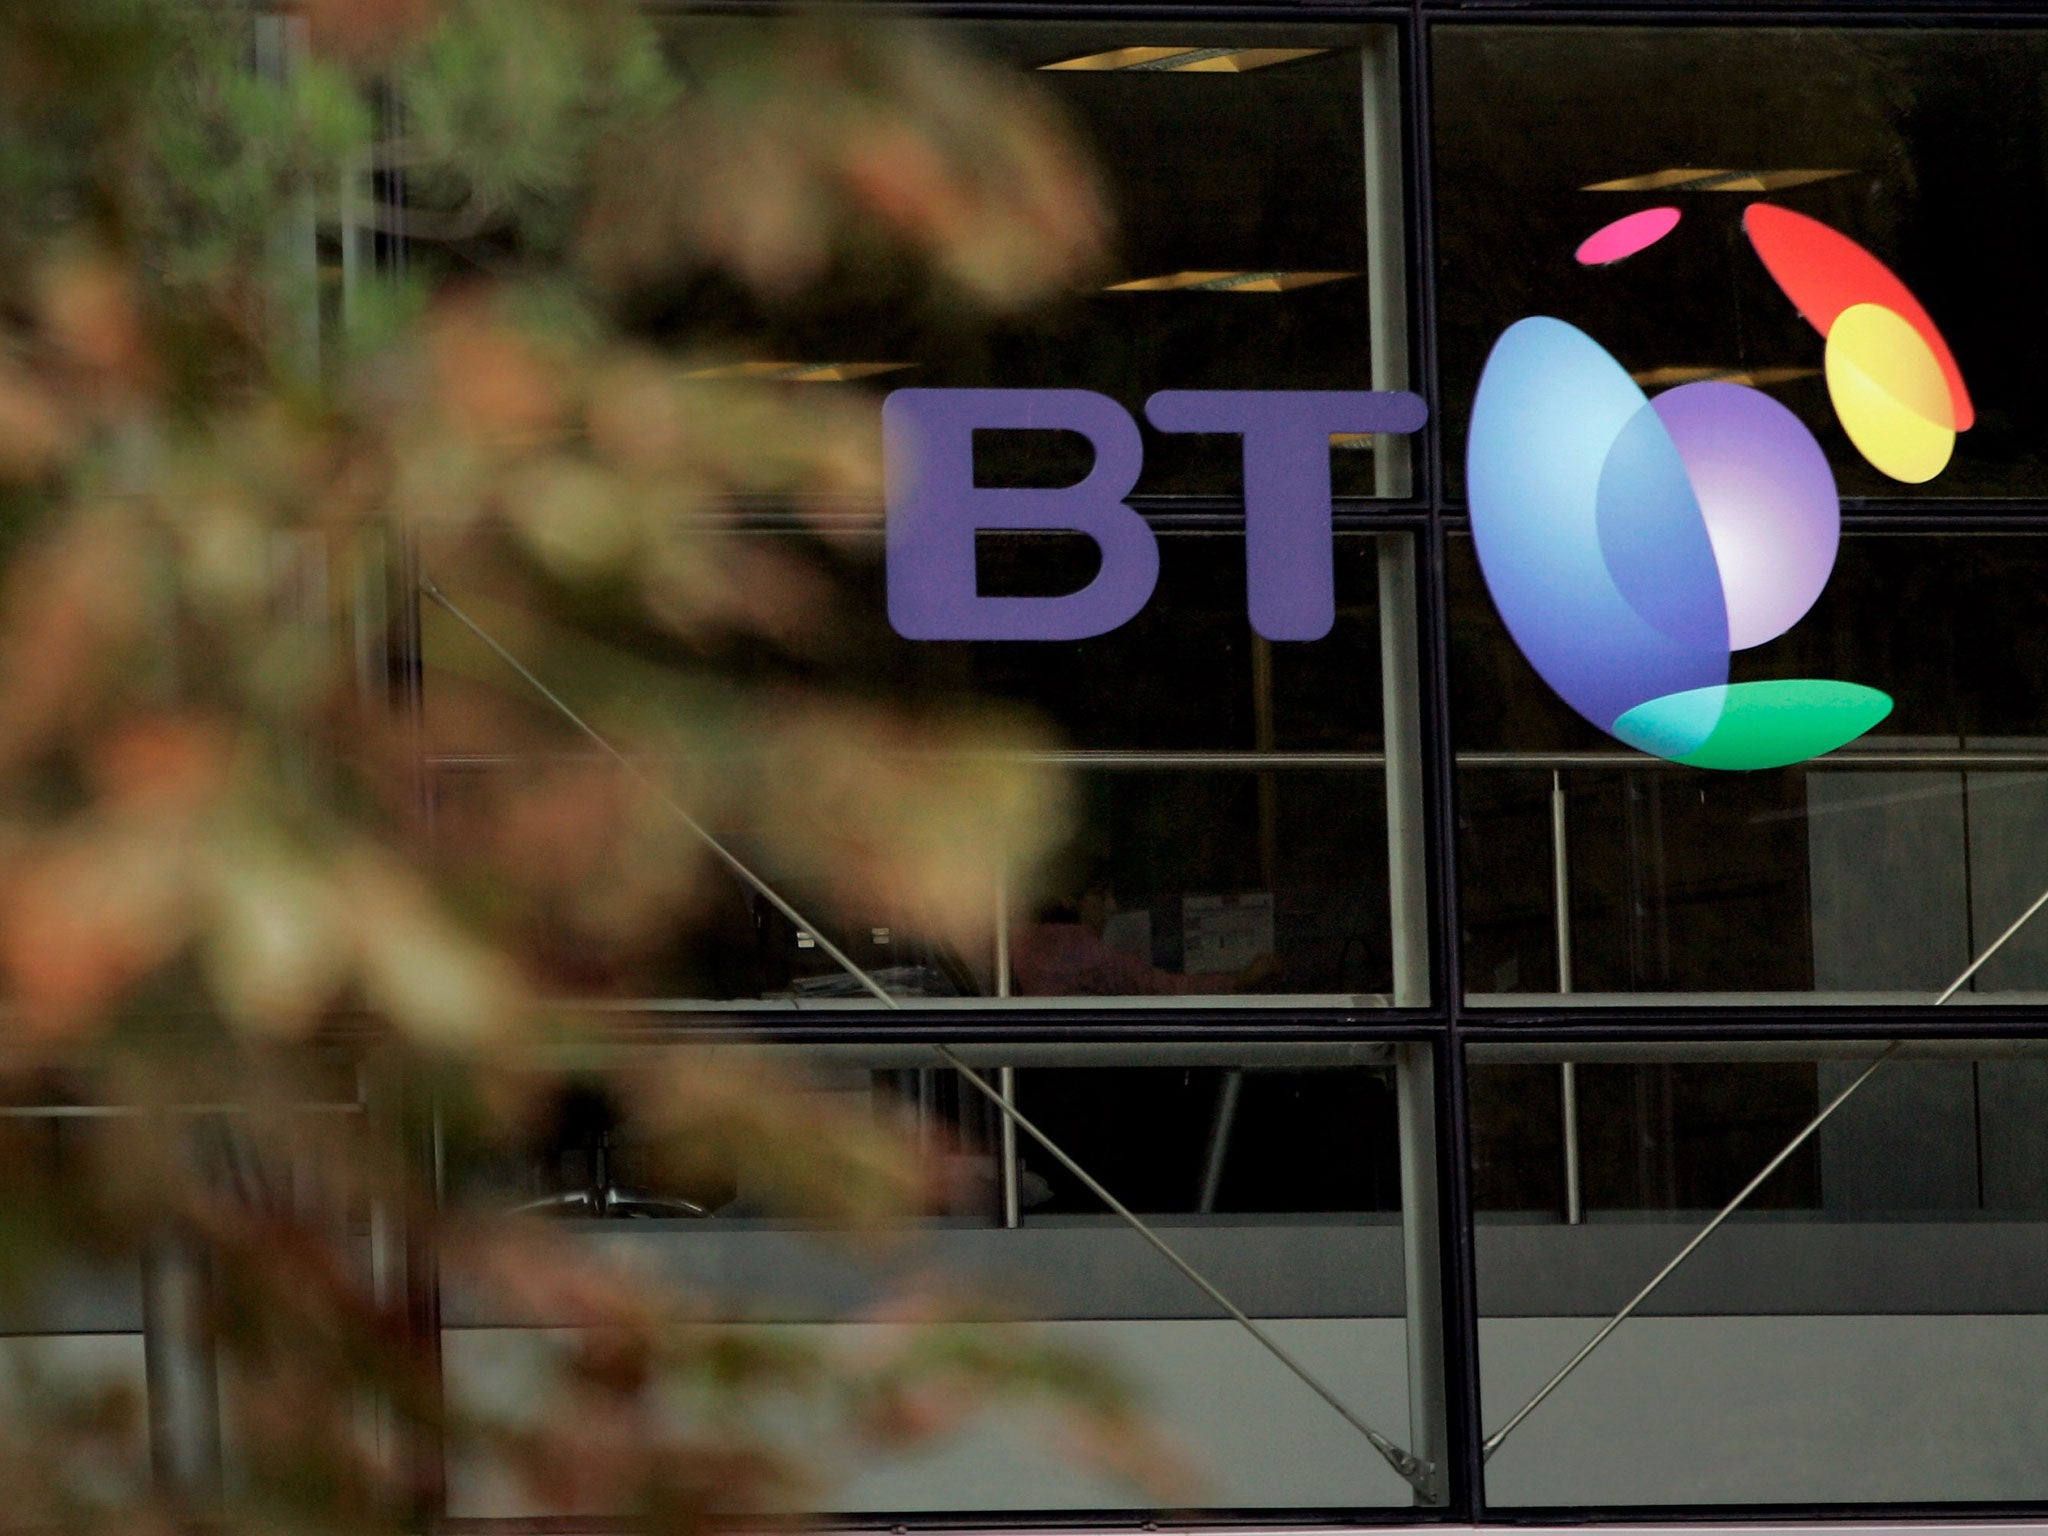 BT is close to being confirmed as the preferred bidder to take on £675m deal